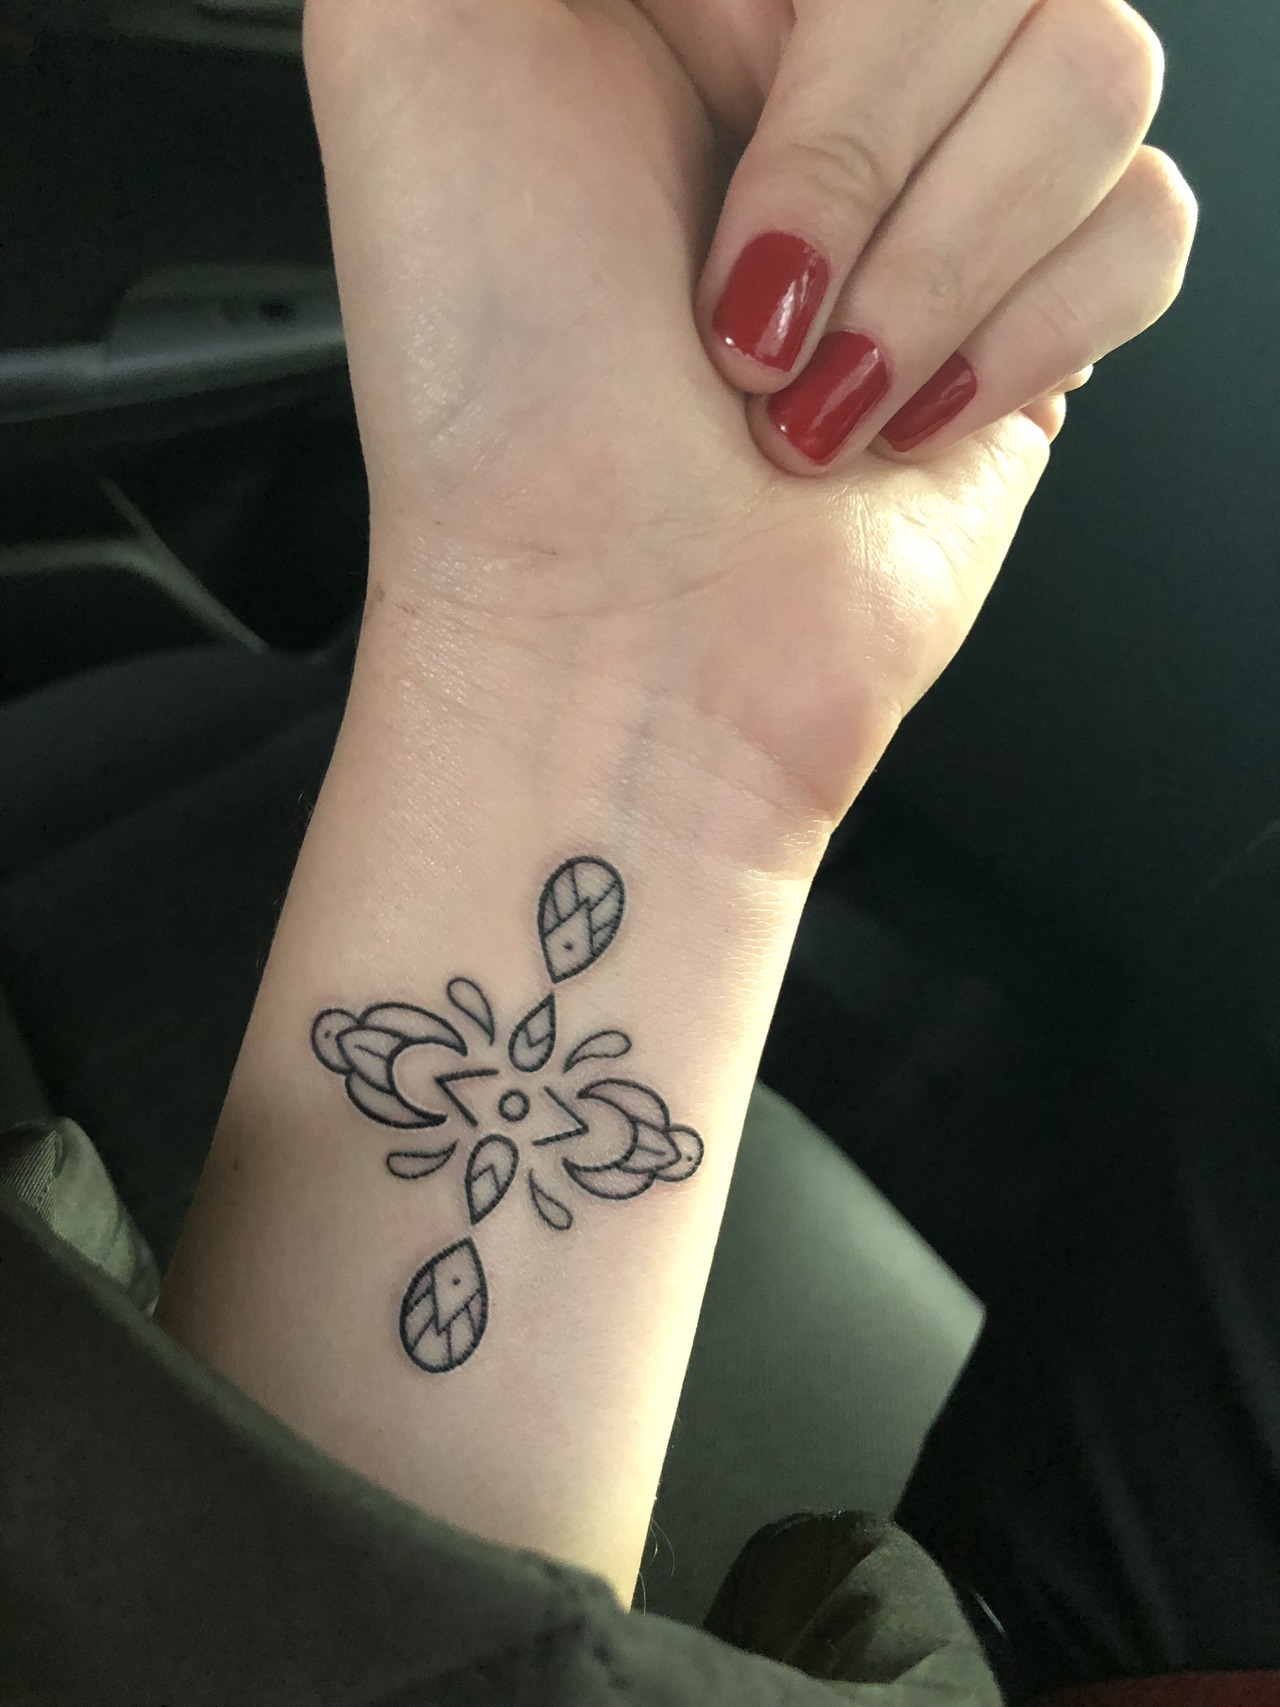 44 Yoga Tattoos with Meaning For Yogis  Our Mindful Life